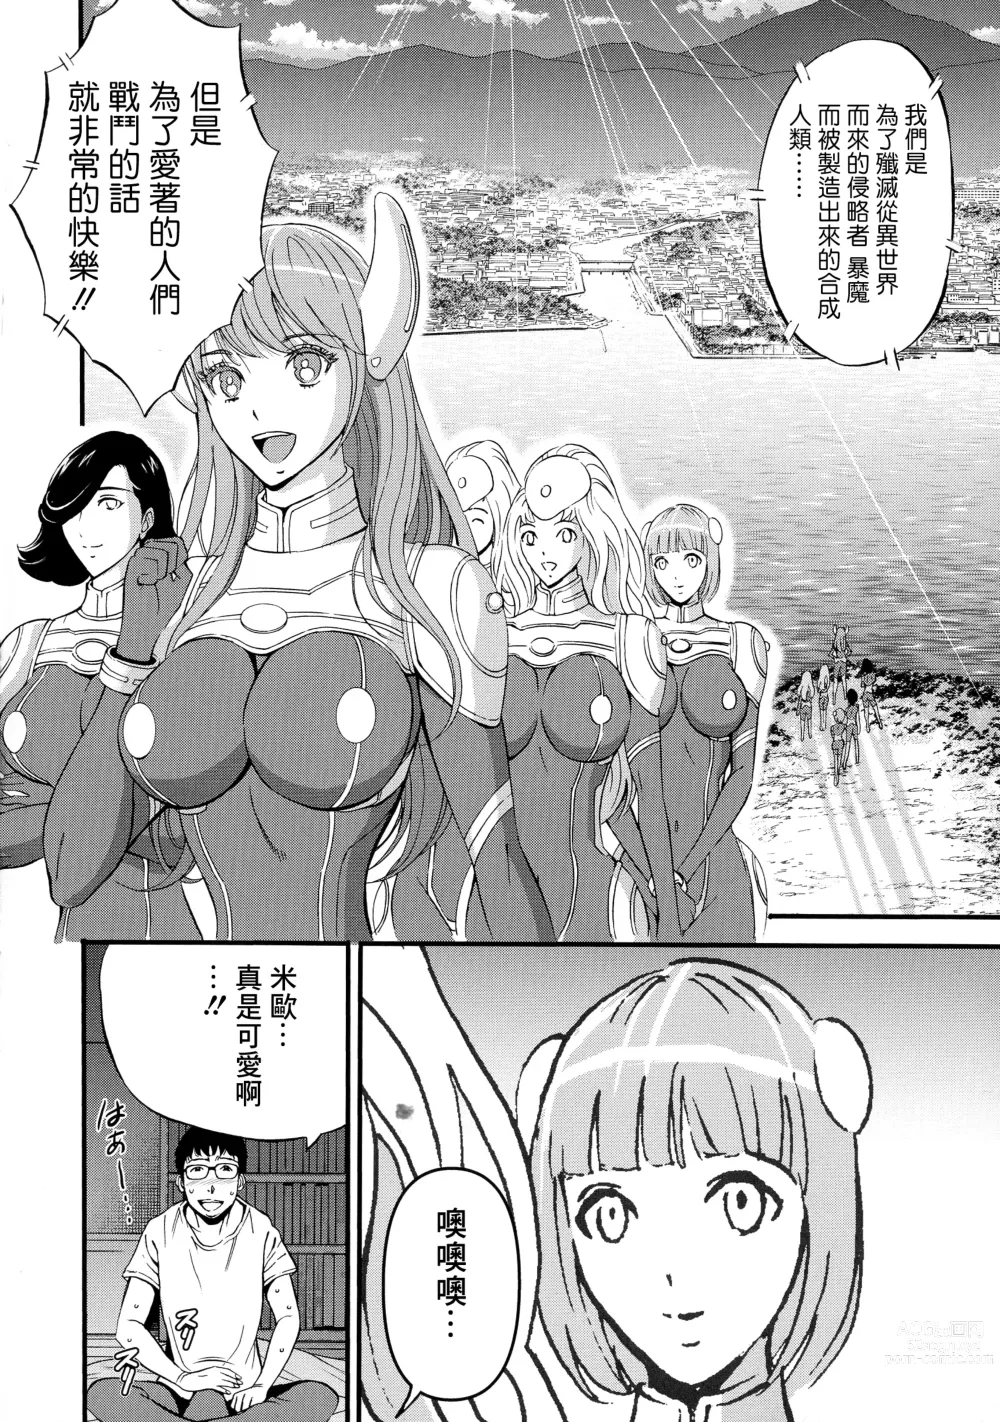 Page 6 of manga Anime Diver Z Ch. 1